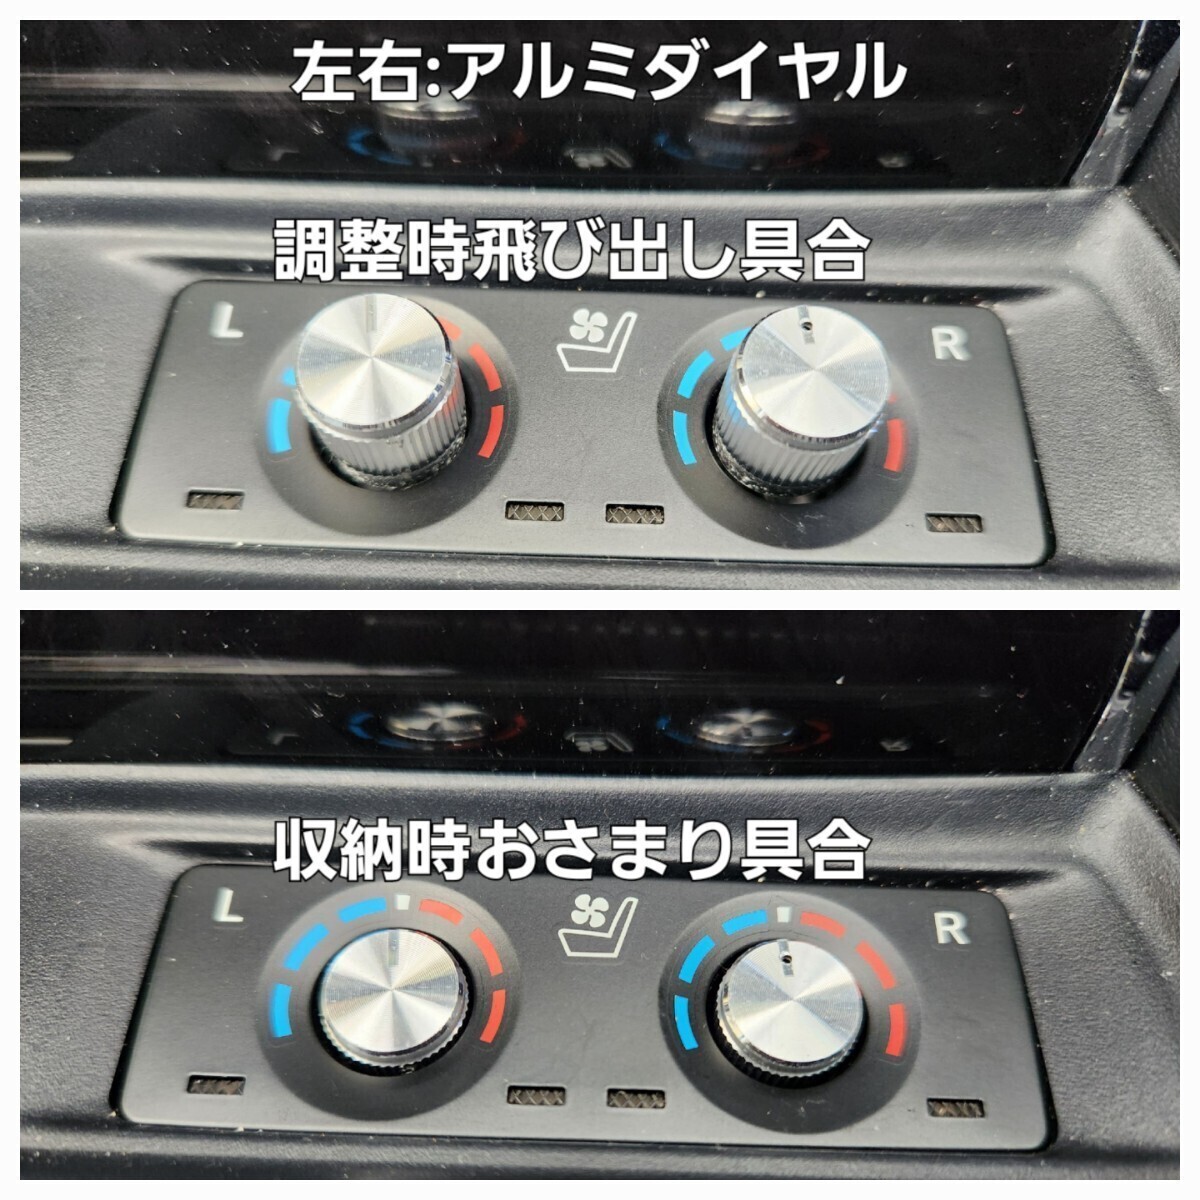  Alphard Vellfire 30 series seat heater seat air conditioner acrylic fiber window . shines aluminium shaving (formation process during milling) adjustment dial switch window hole have tube 221